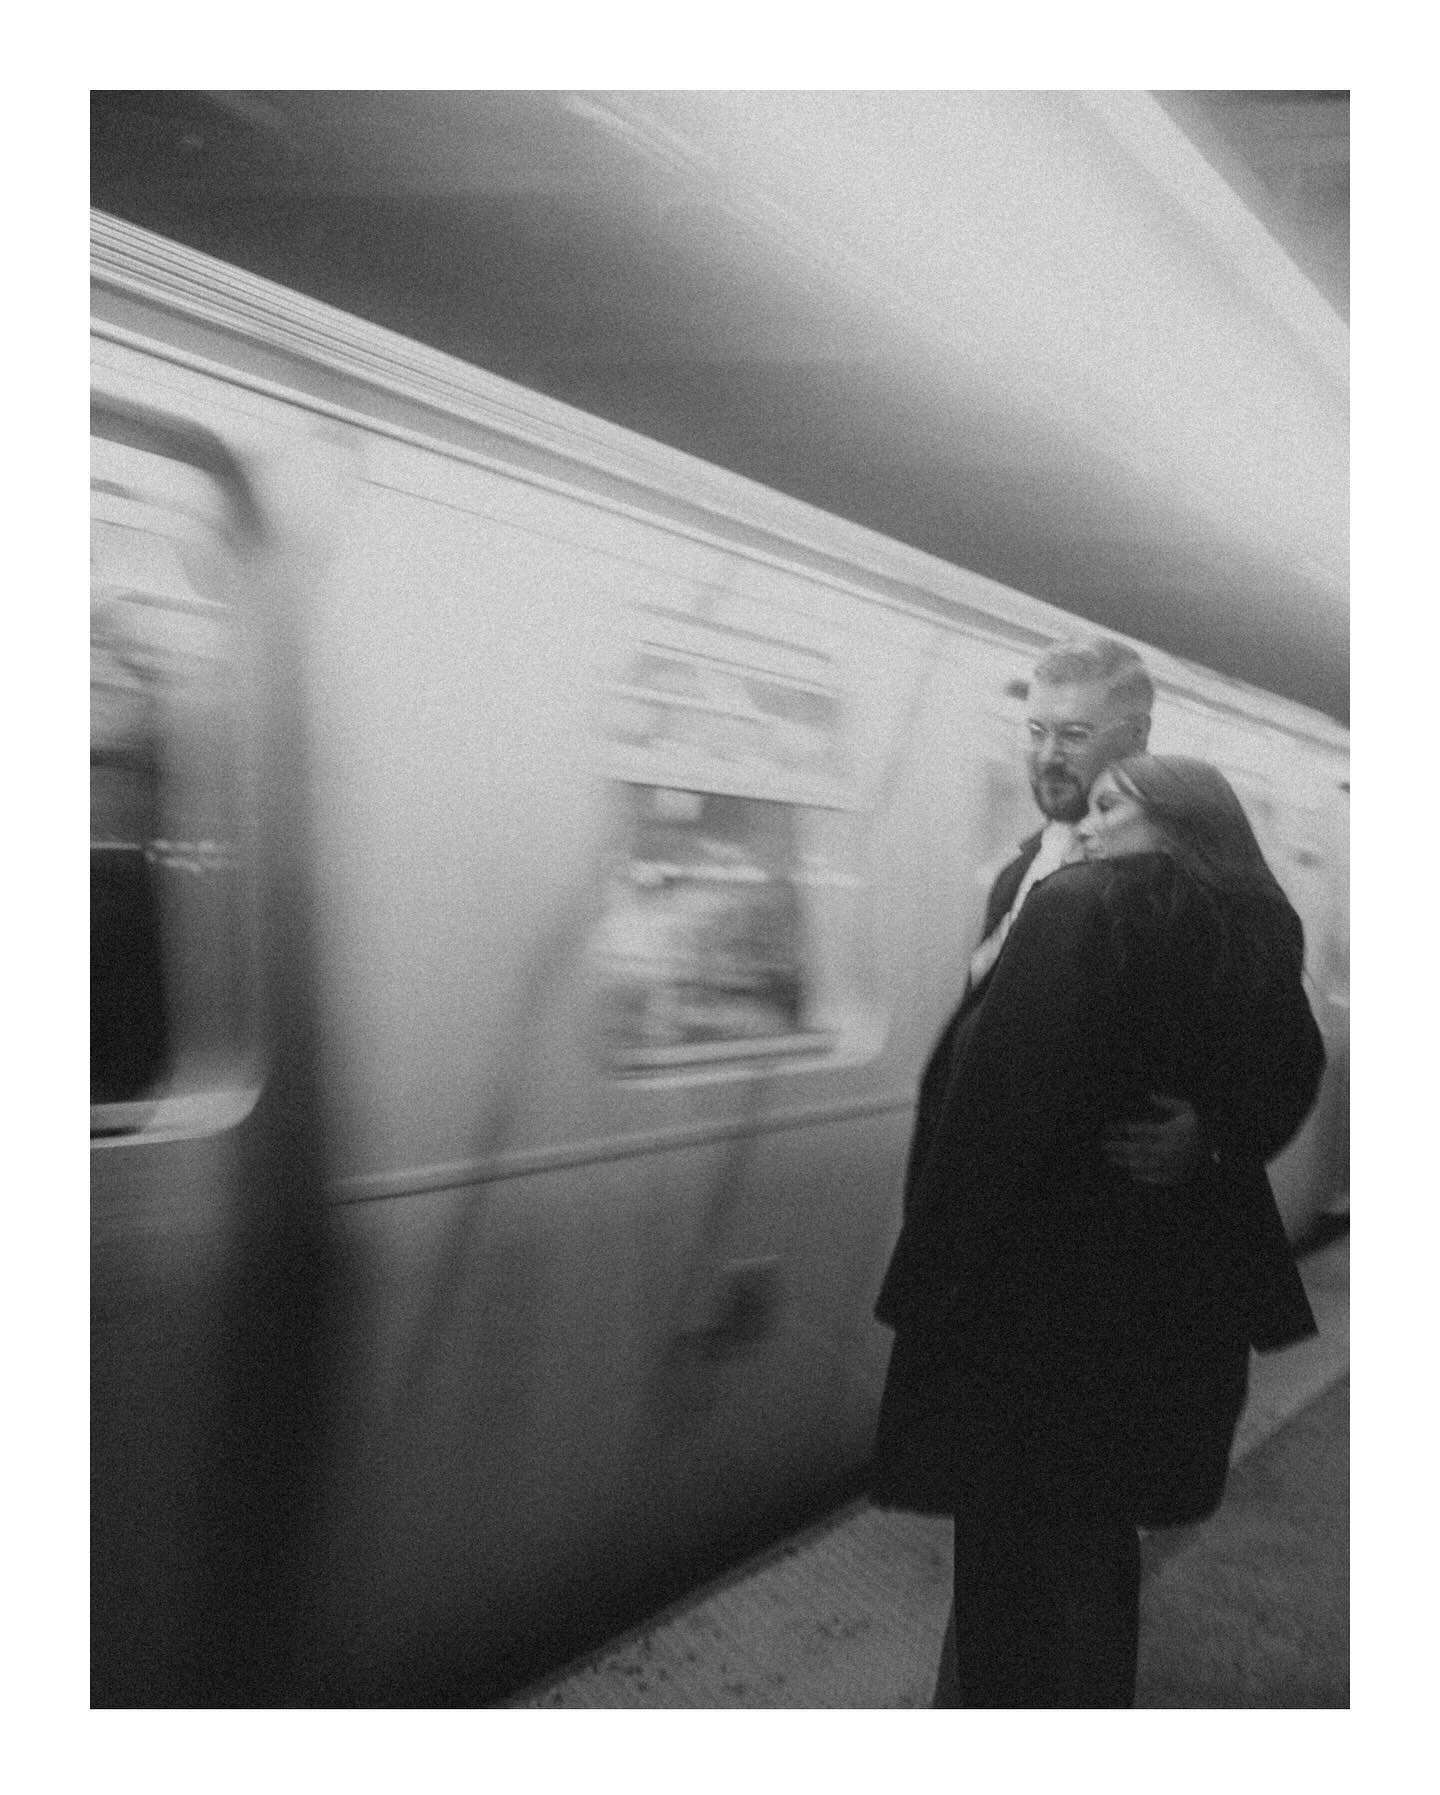 Some black and white moments from the giveaway winners engagement session in NYC 🚇 🌆 

A time was hadddd lemme tell you! This one&rsquo;s for the blogs tho, stay tuned! 💻📝

I have so much content to put out, I can&rsquo;t wait to show you everyth